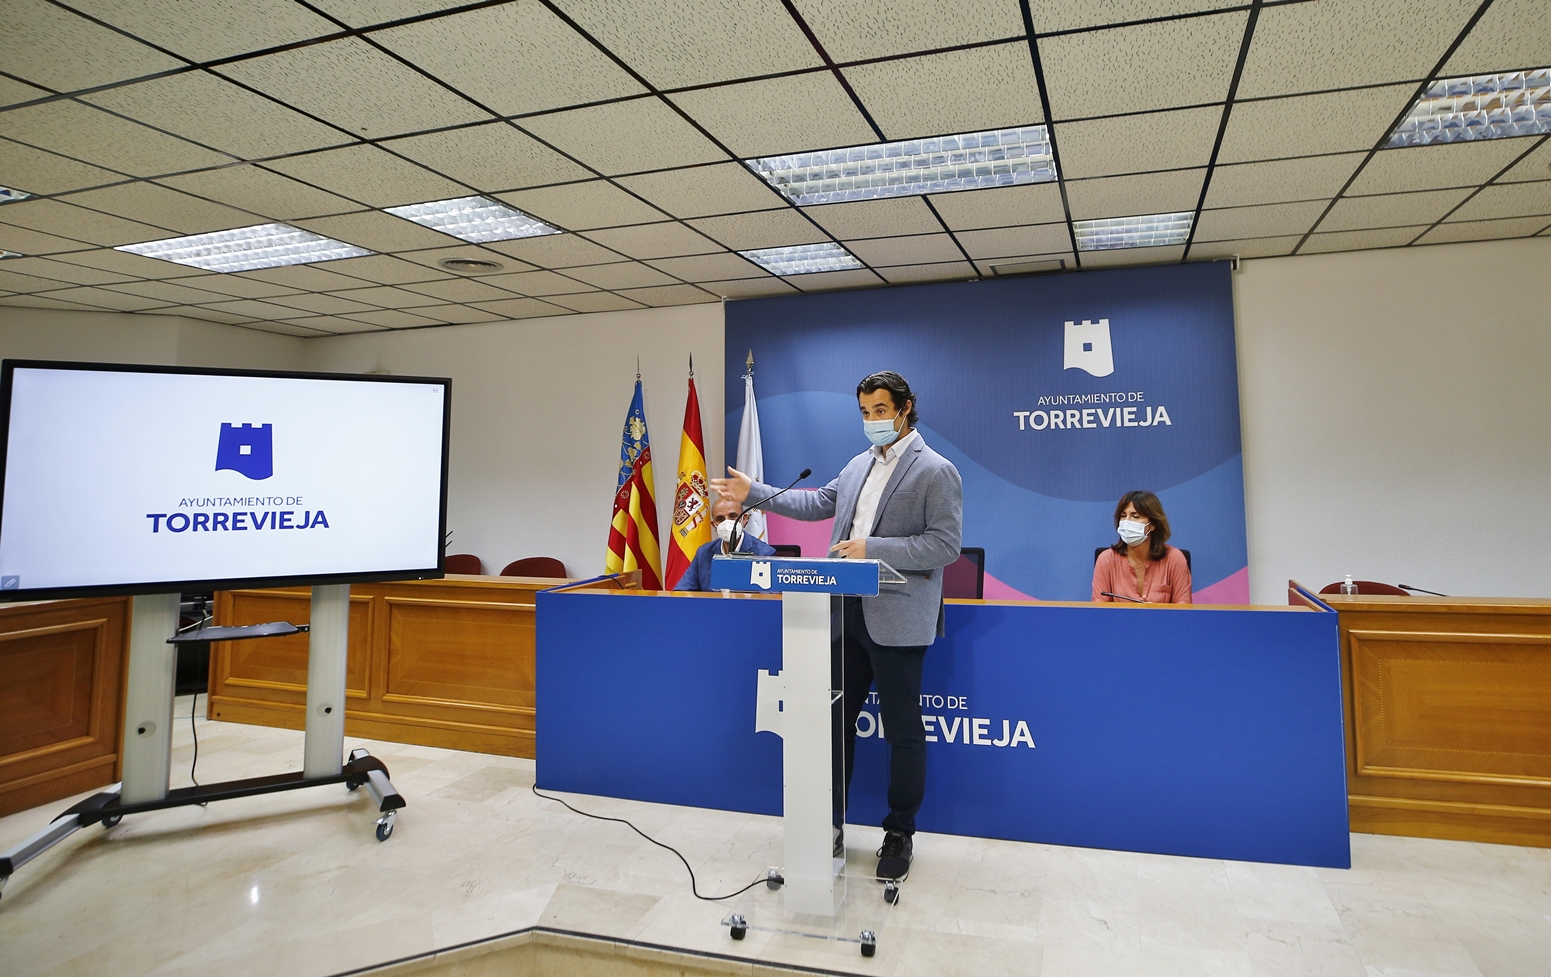 A New 'contemporary' Corporate Logo Costing €33,000 Is Unveiled By A Costa Blanca Council In Spain